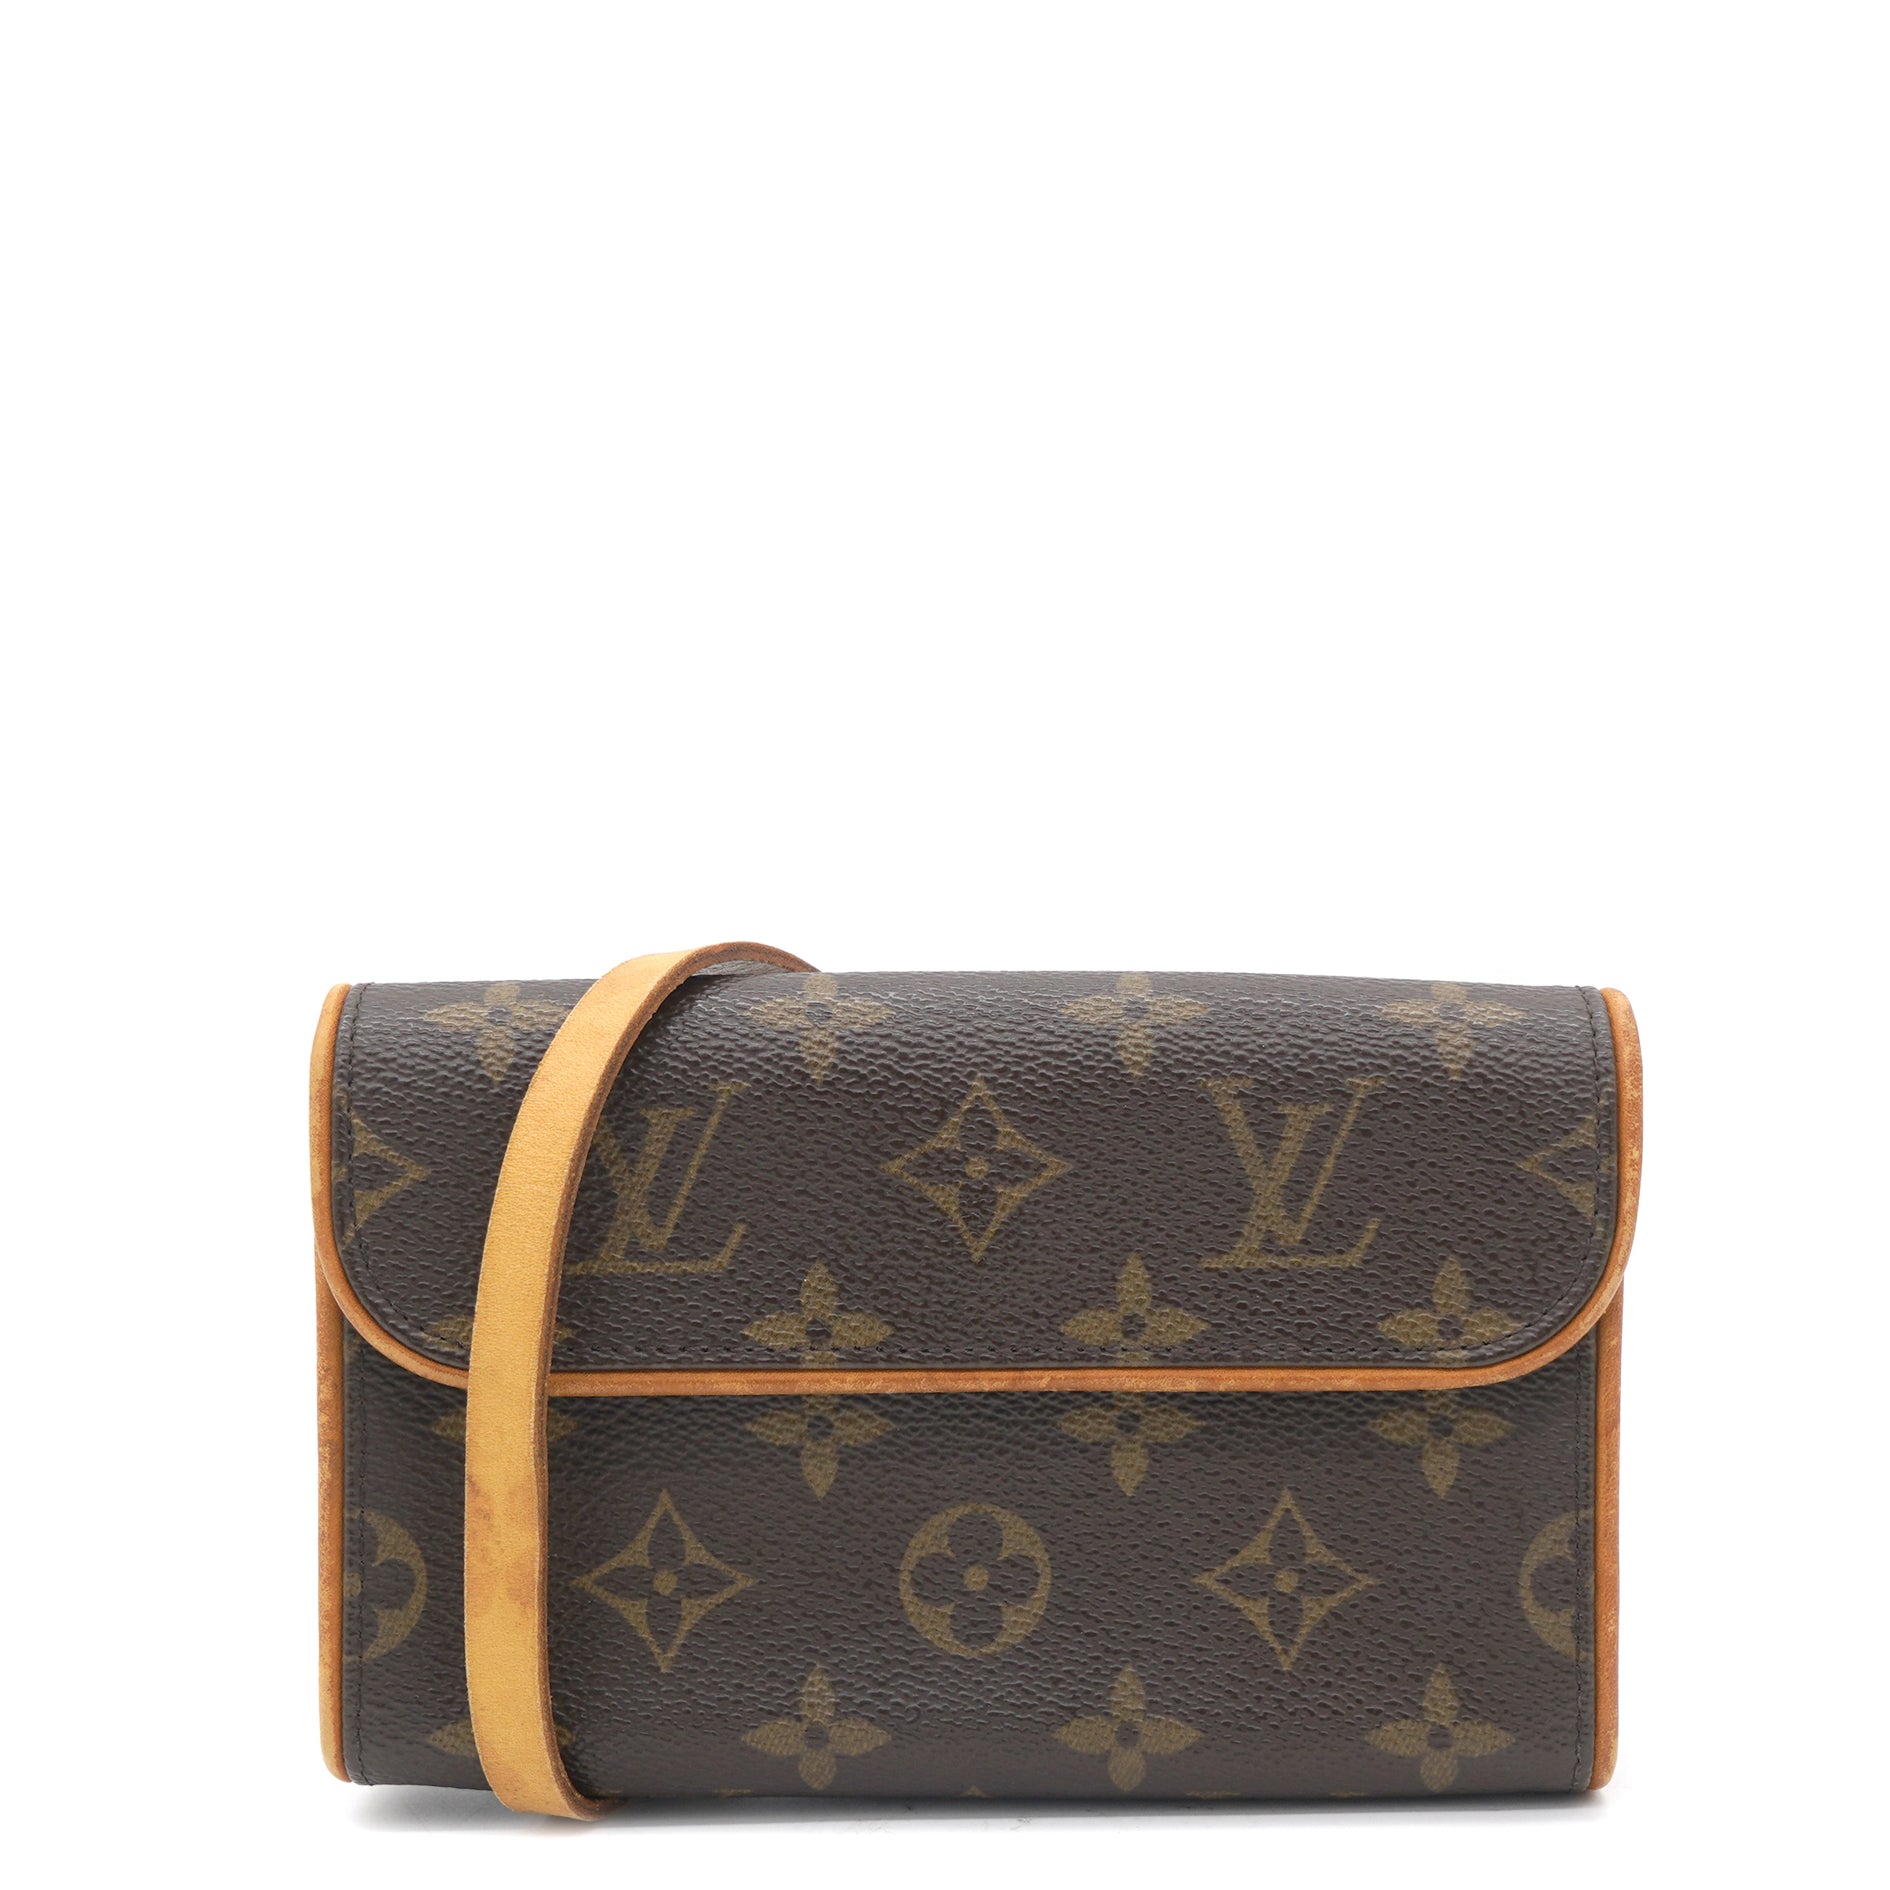 Beltbag Coussin Fashion Leather  Wallets and Small Leather Goods  LOUIS  VUITTON